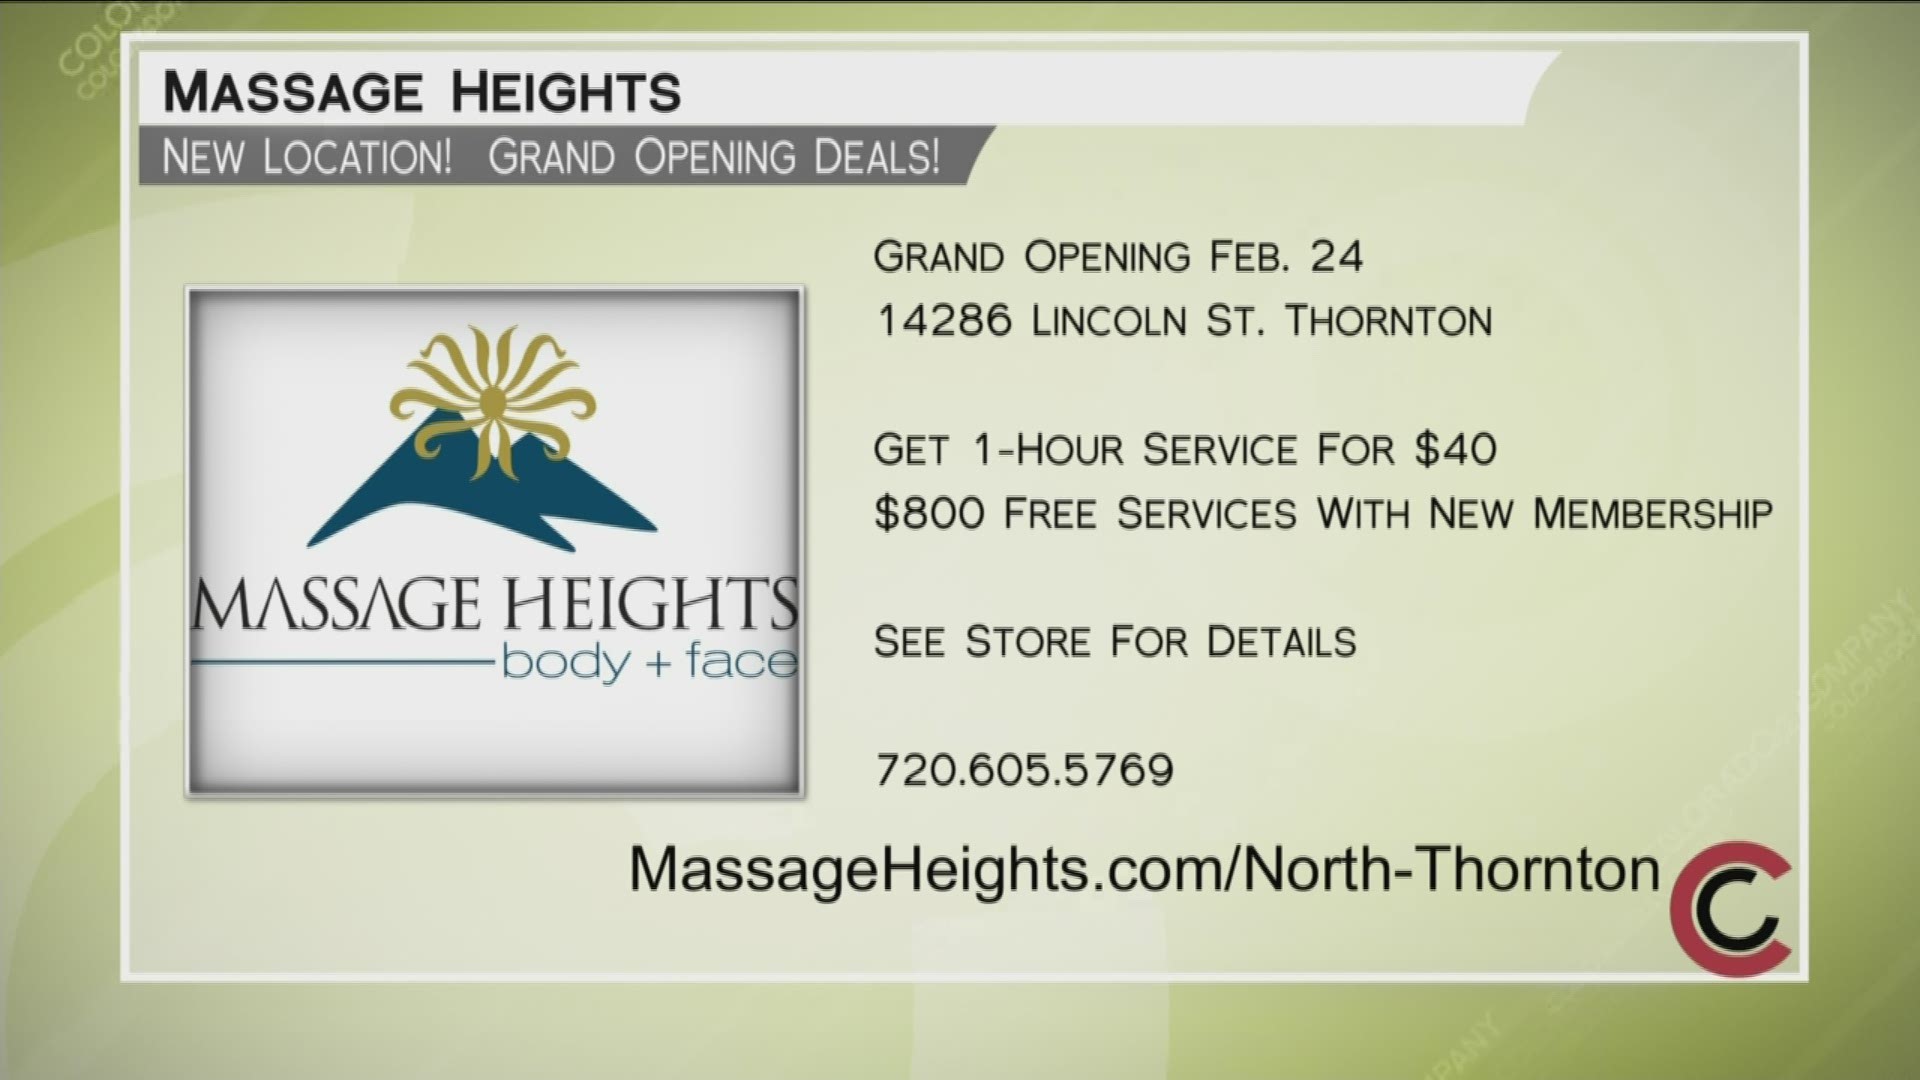 Massage Heights in North Thornton can elevate your every day. Call 720.605.5769 or visit MassageHeights.com/North-Thornton to schedule your service and learn more.